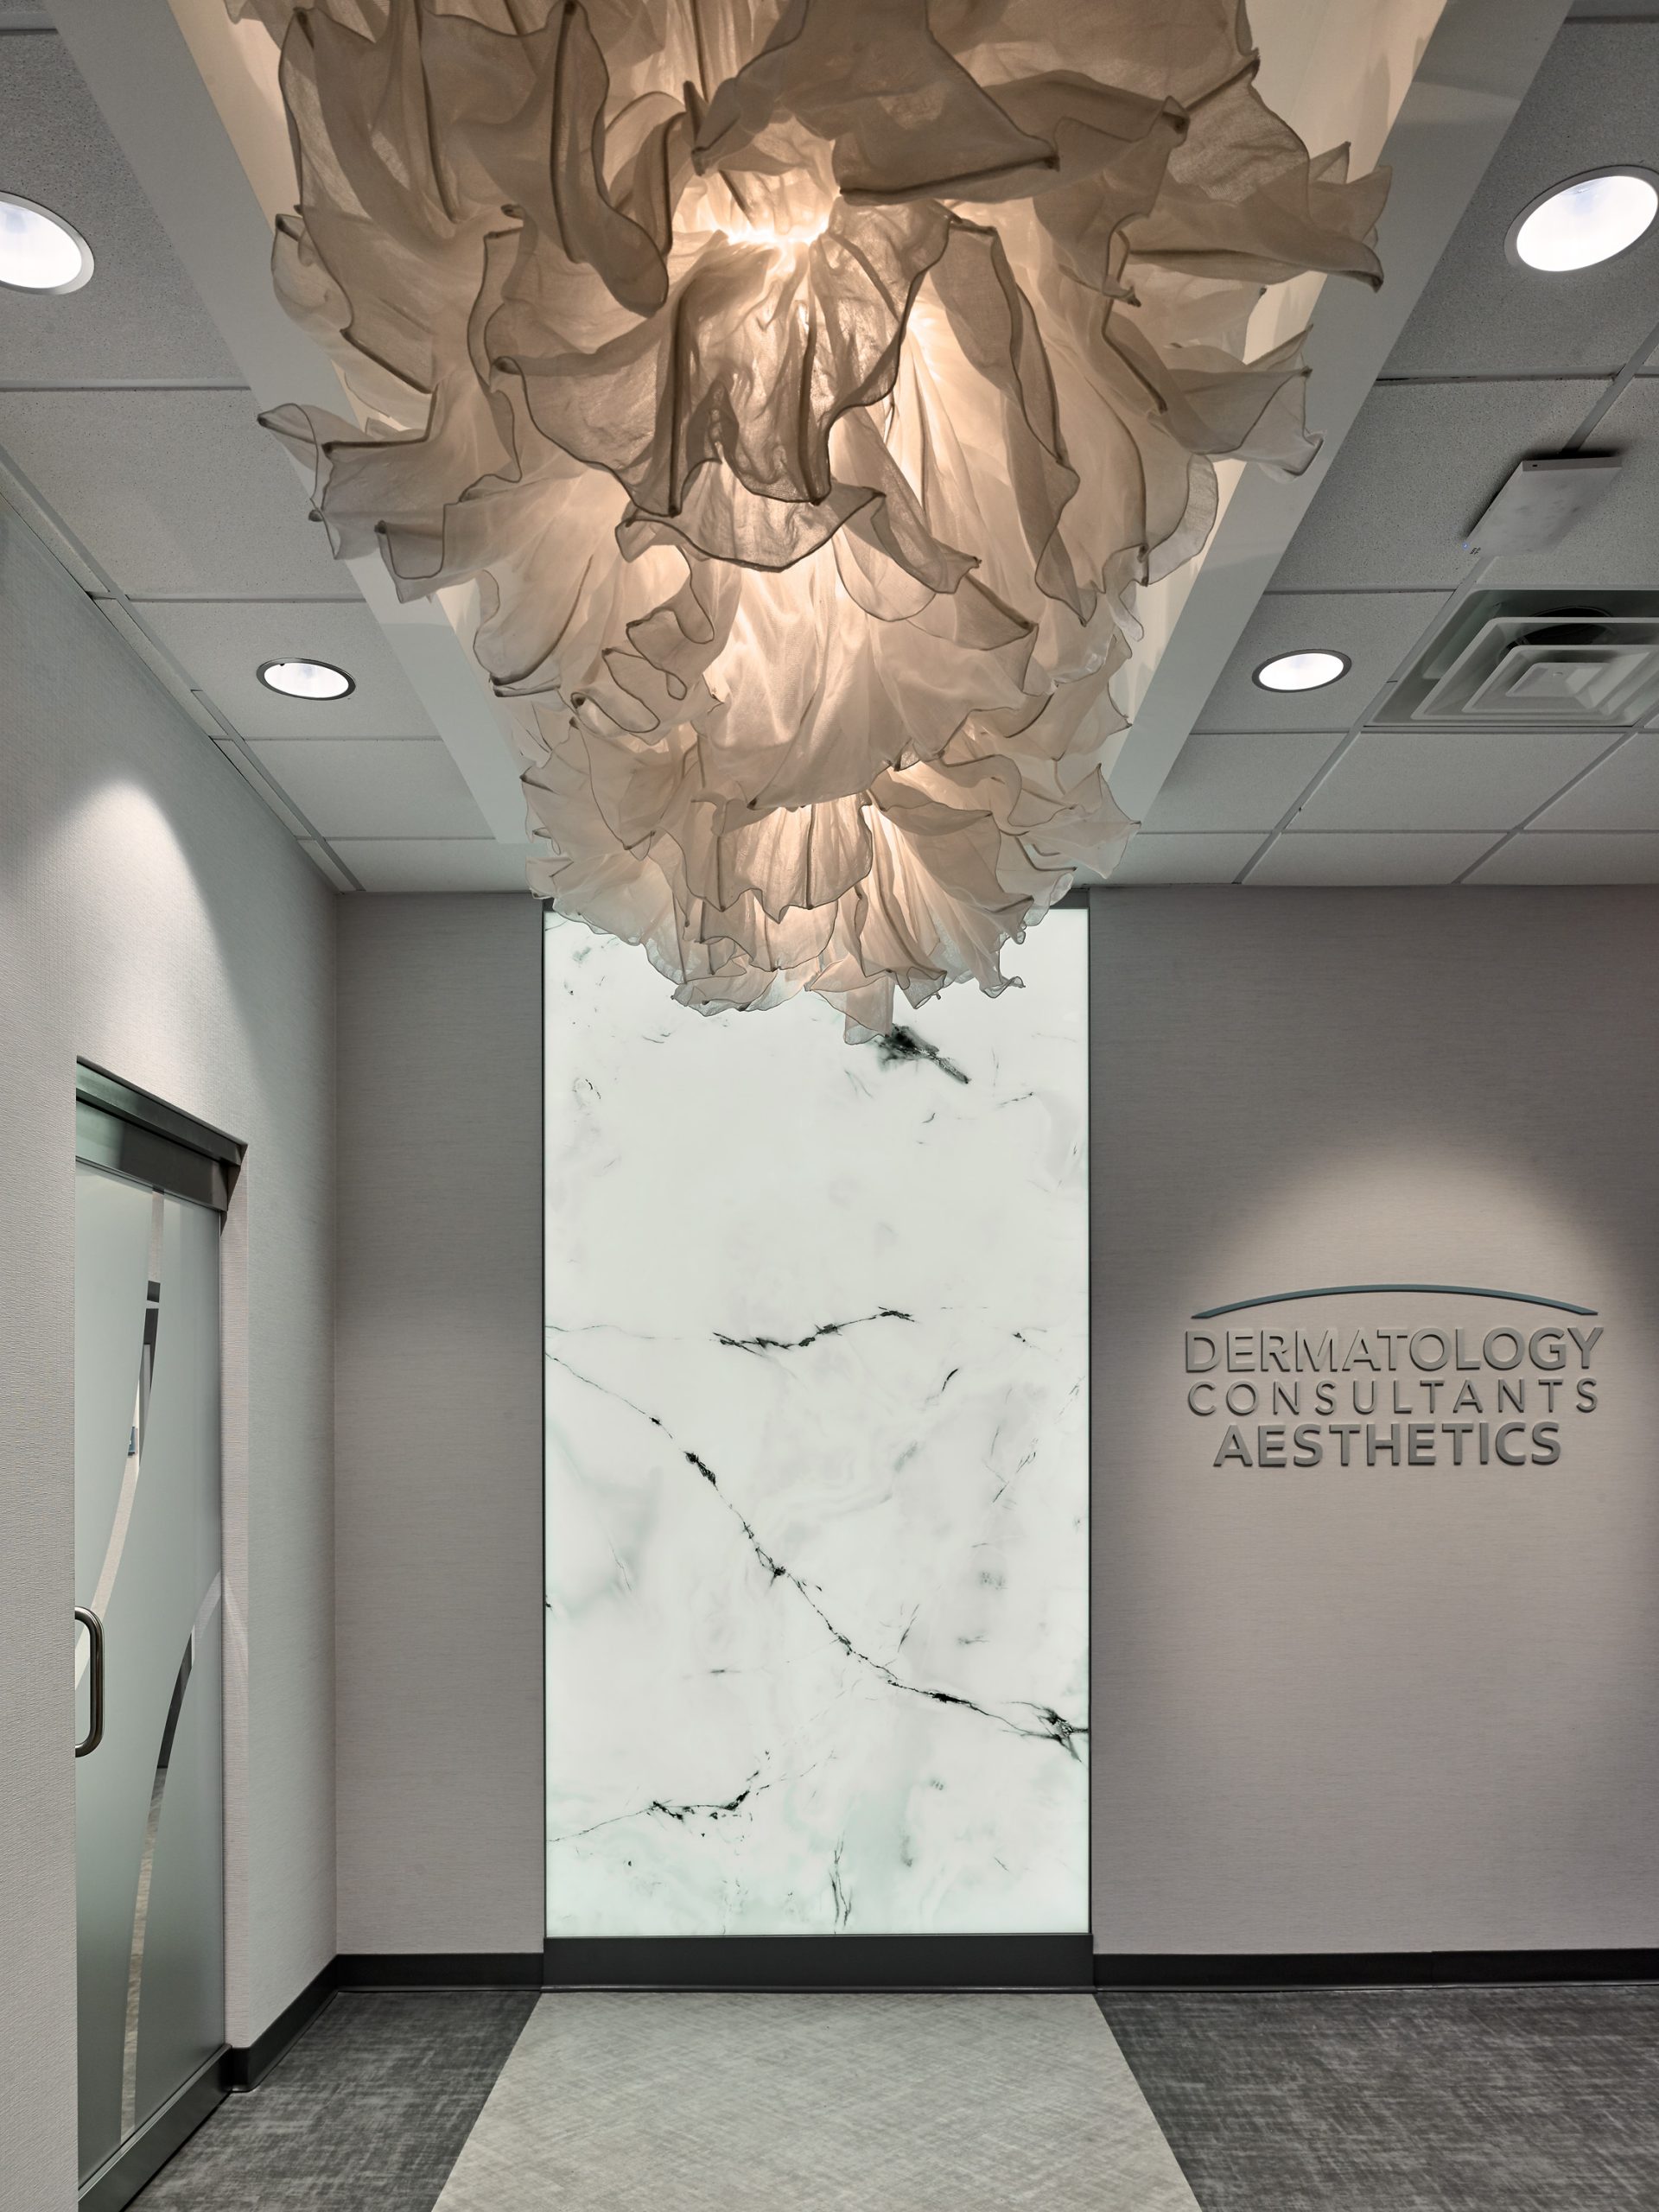 Unique chandelier and accent marble wall in Dermatology Consultants office